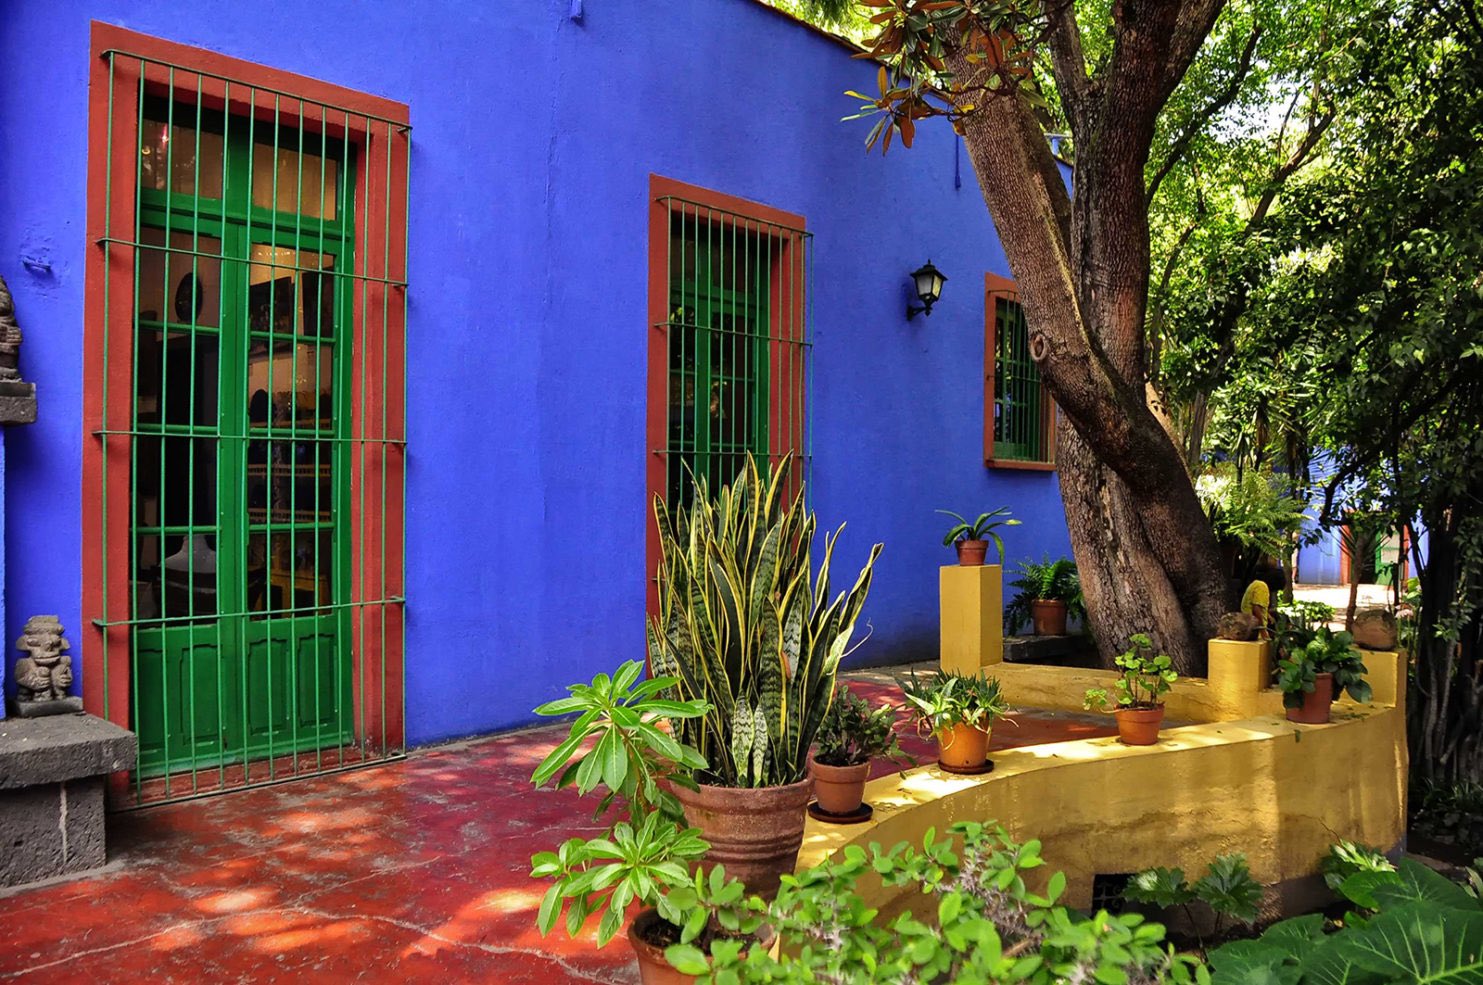 Frida Kahlo's home is a riot of colour